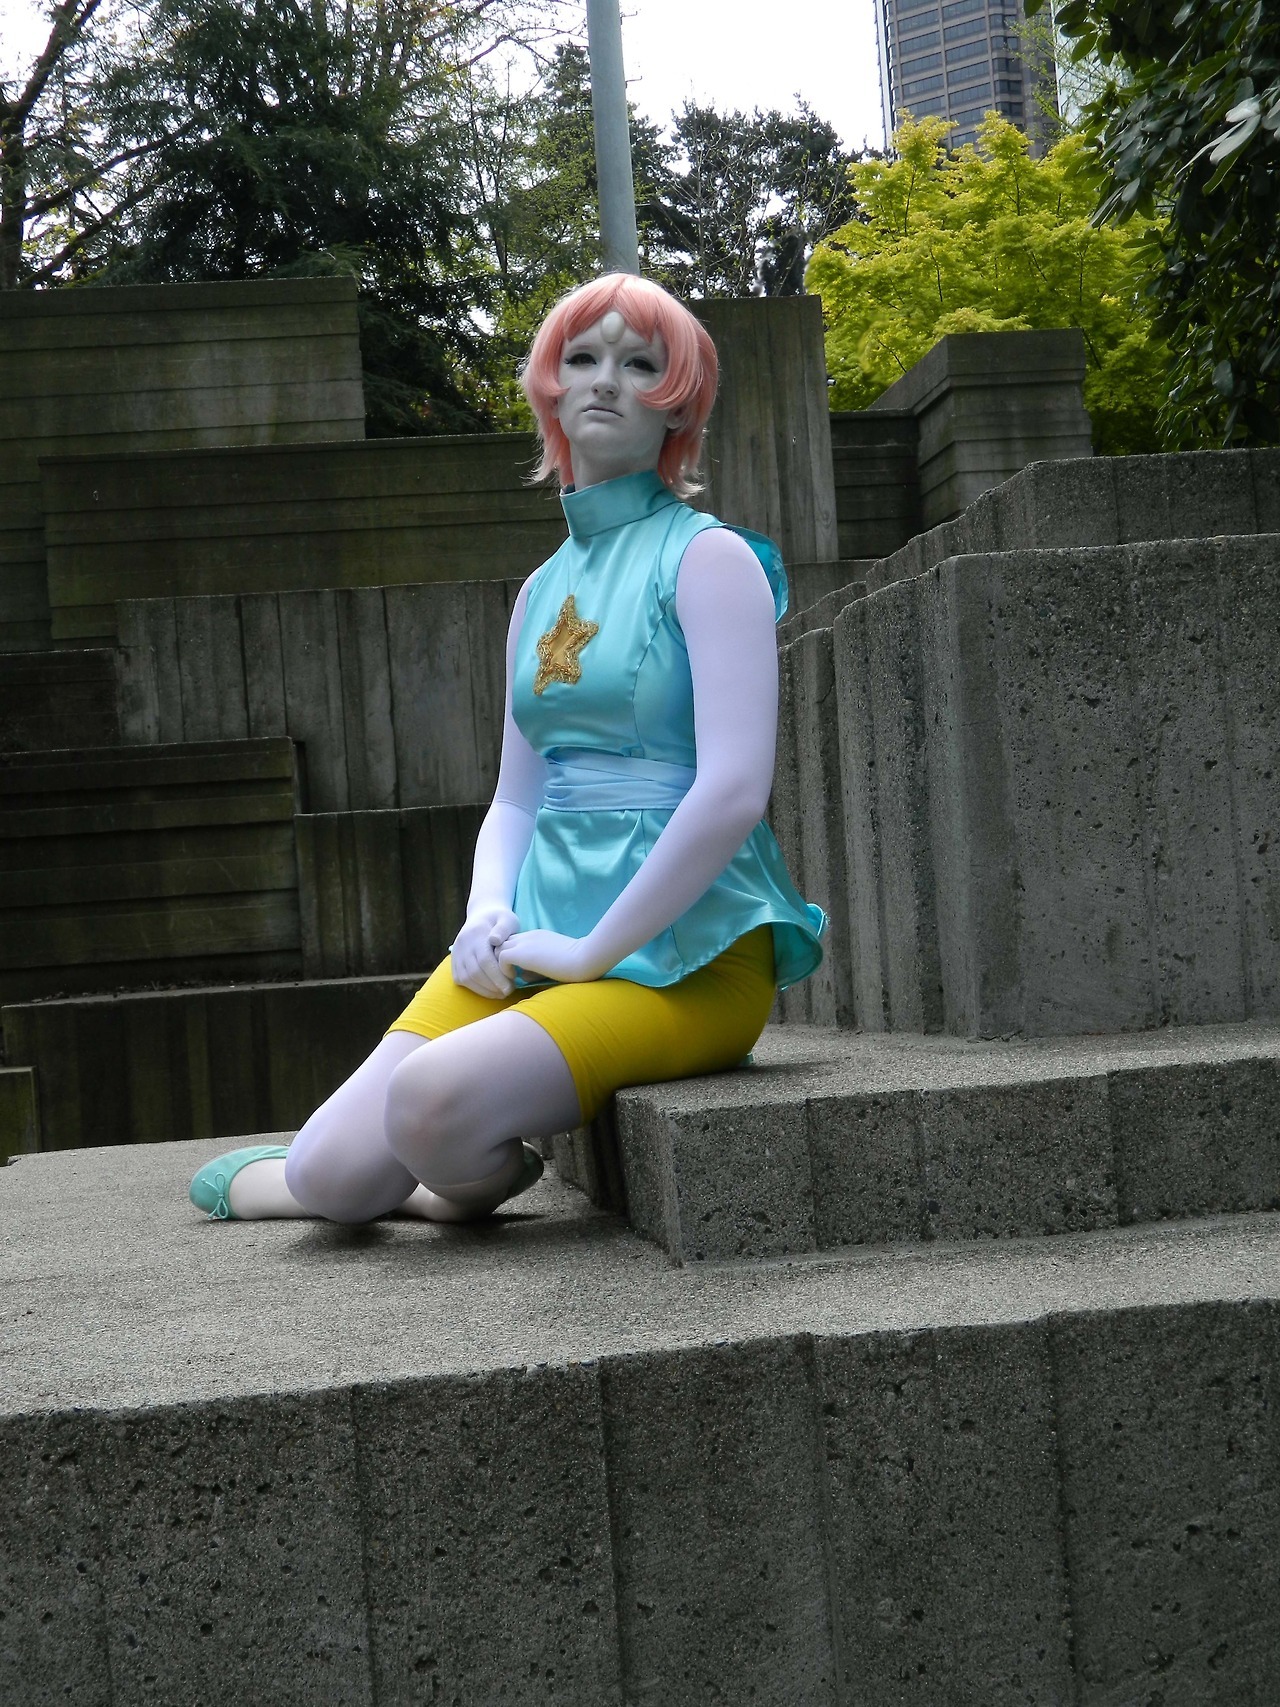 Finally got around to editing some Pearl Photos from Sakura con. I love this cosplay so much